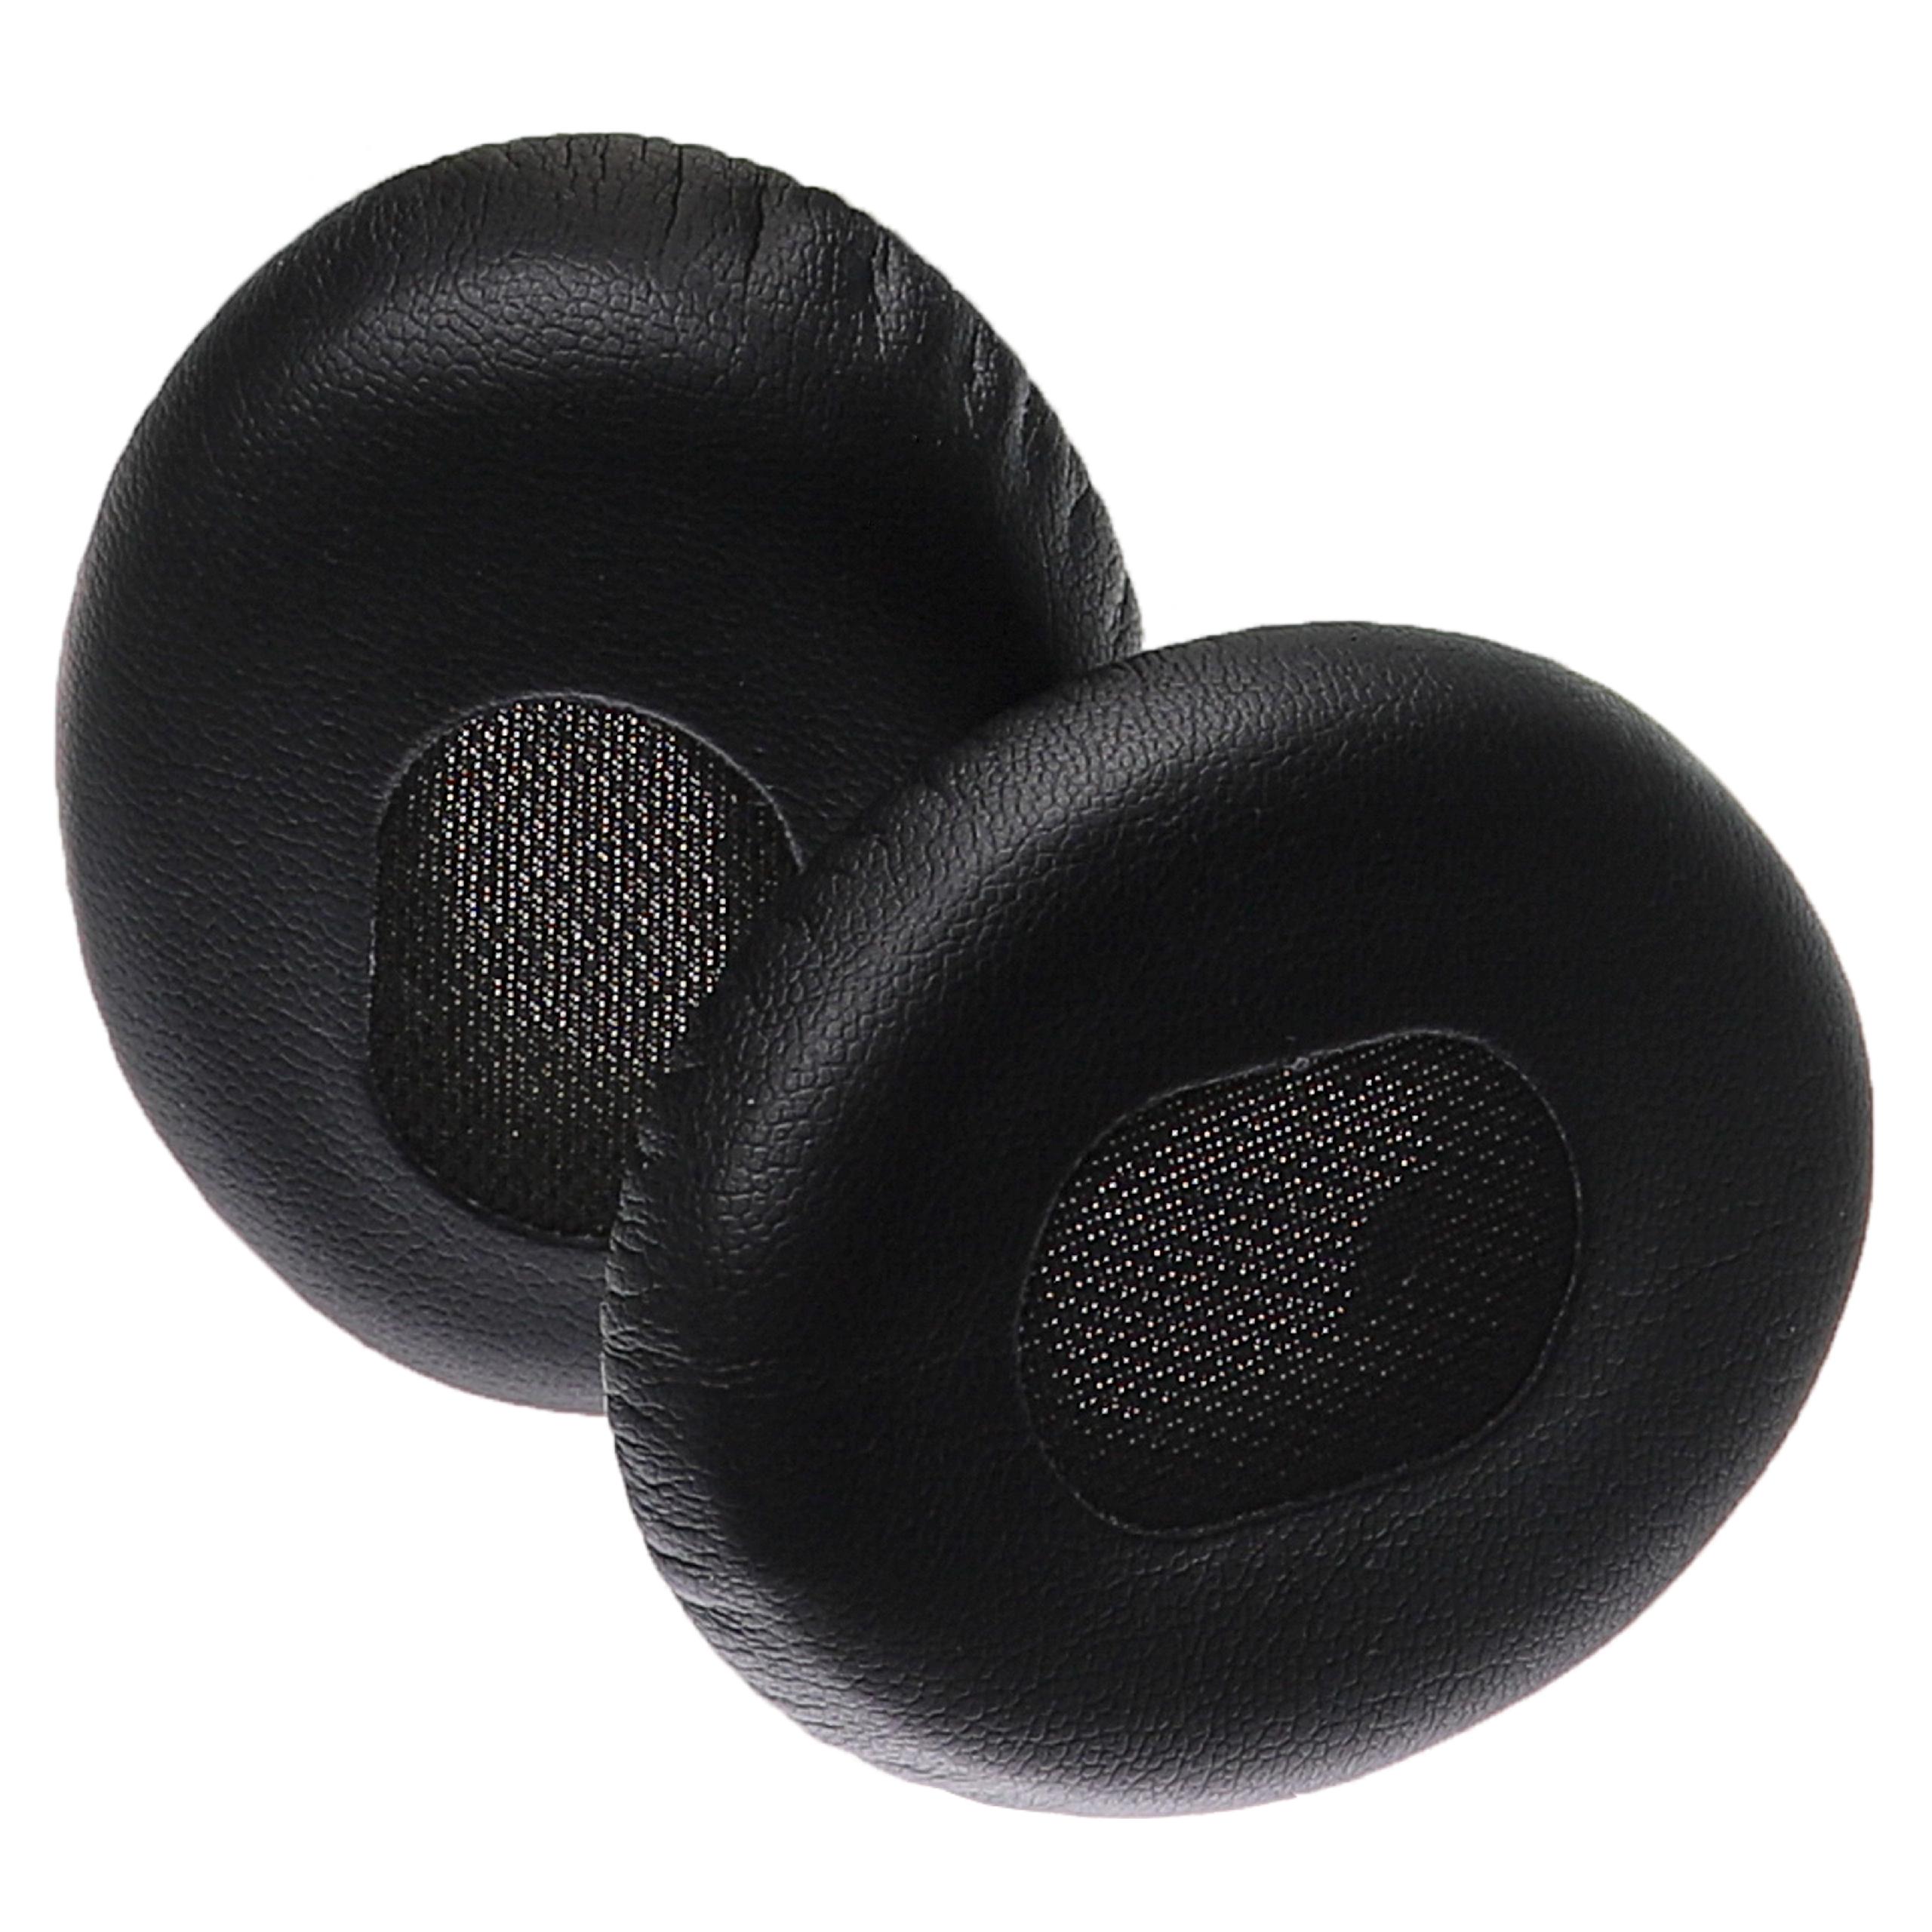 Ear Pads suitable for Bose QuietComfort Headphones etc. - with Memory Foam, Soft Material, 31 mm thick